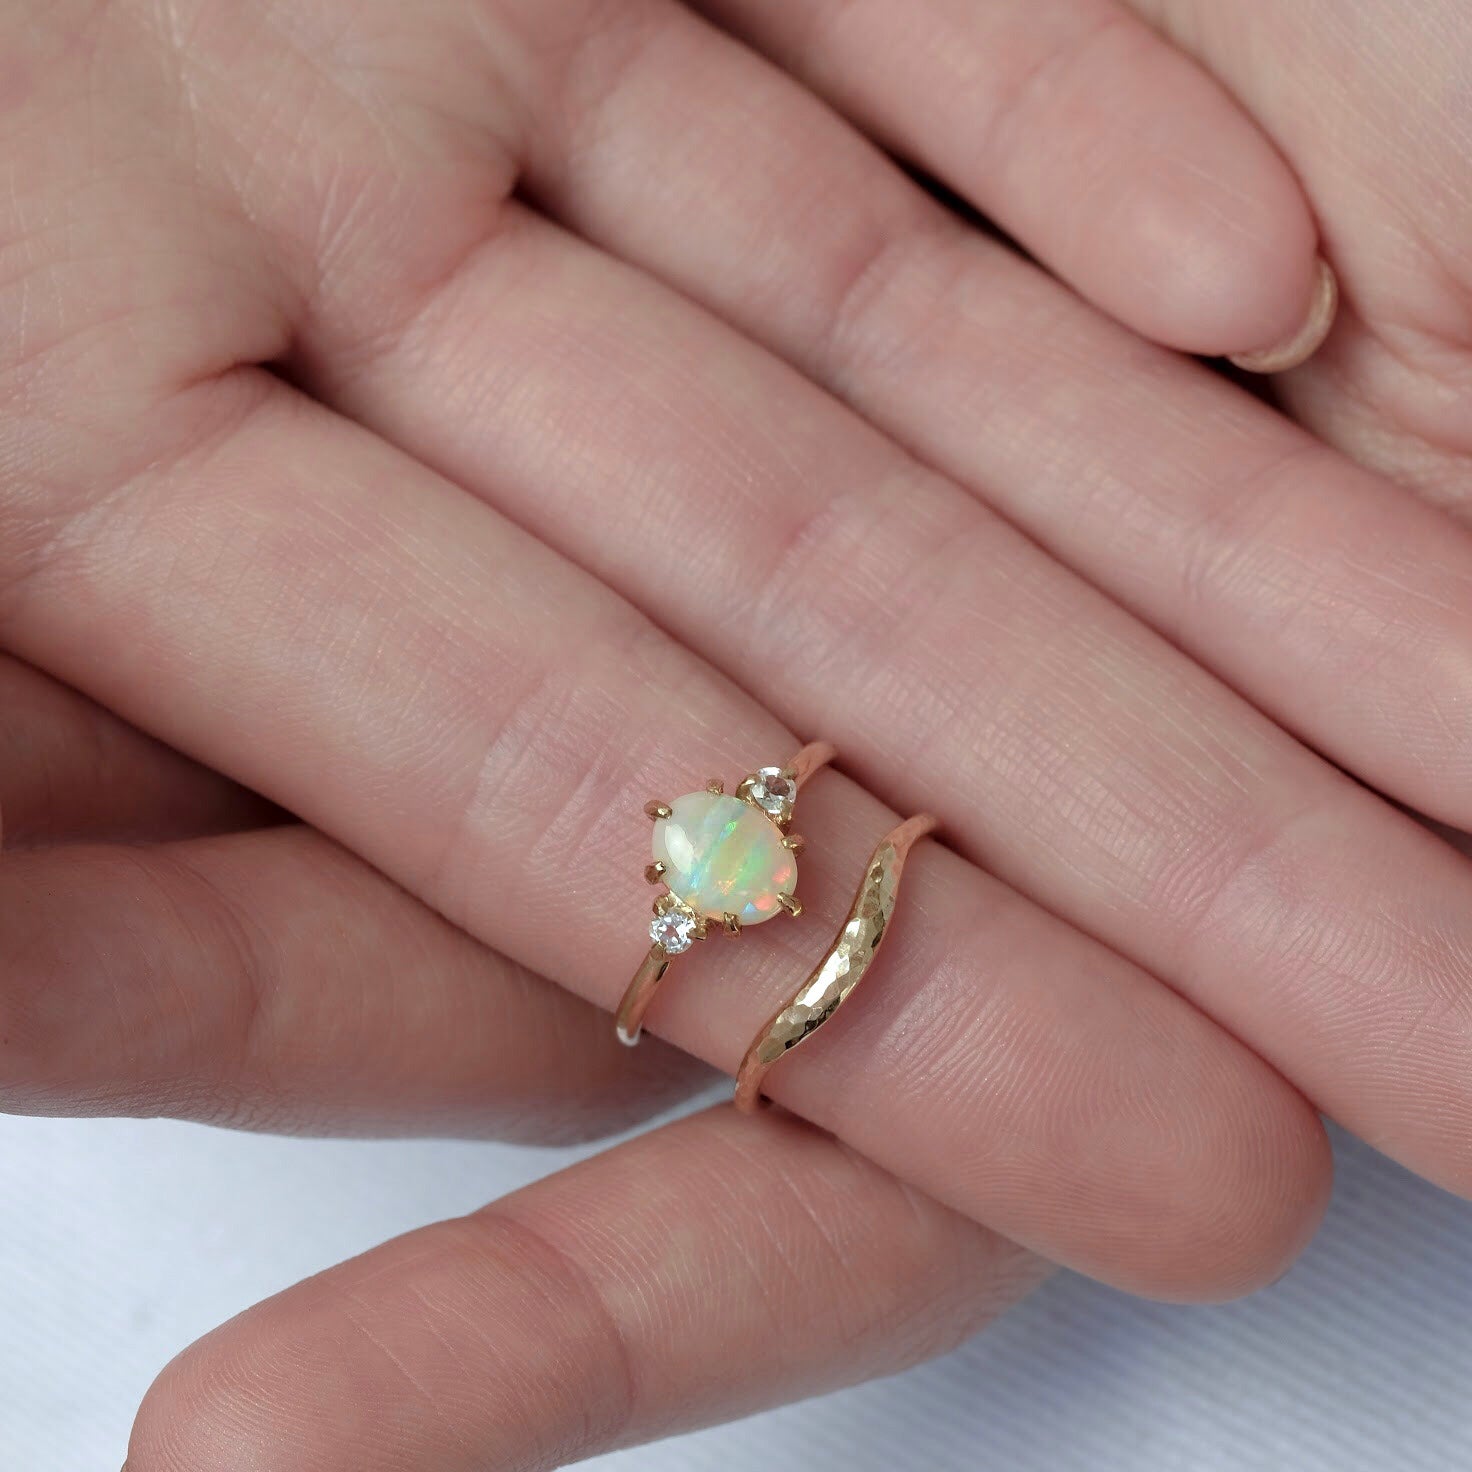 Victoria Ring, White Opal, 9kt Yellow Gold